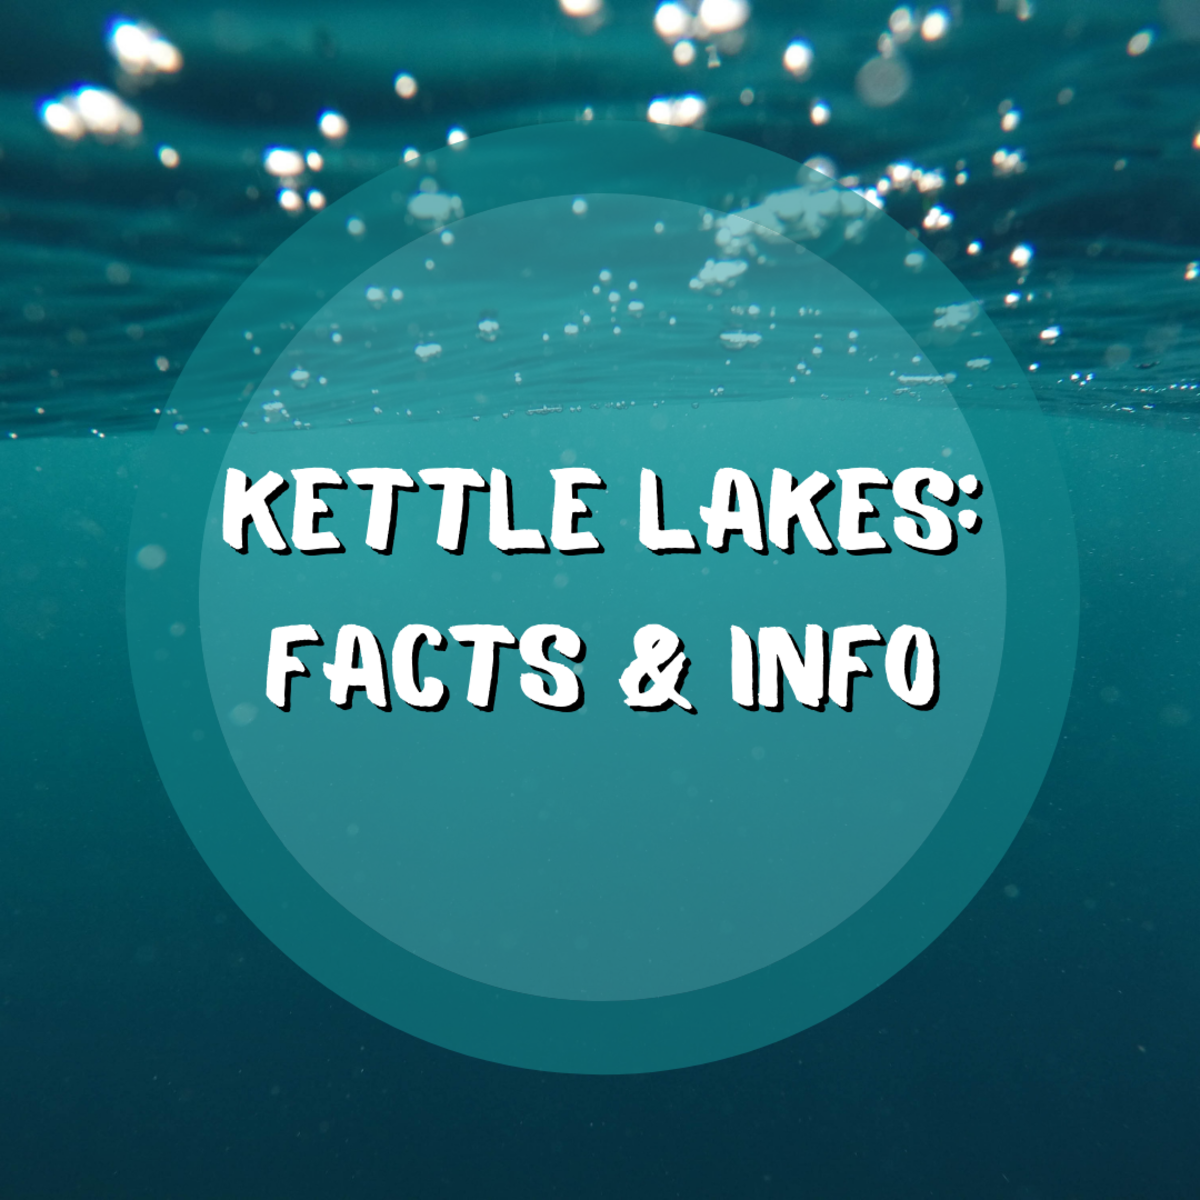 What Are Kettle Lakes?